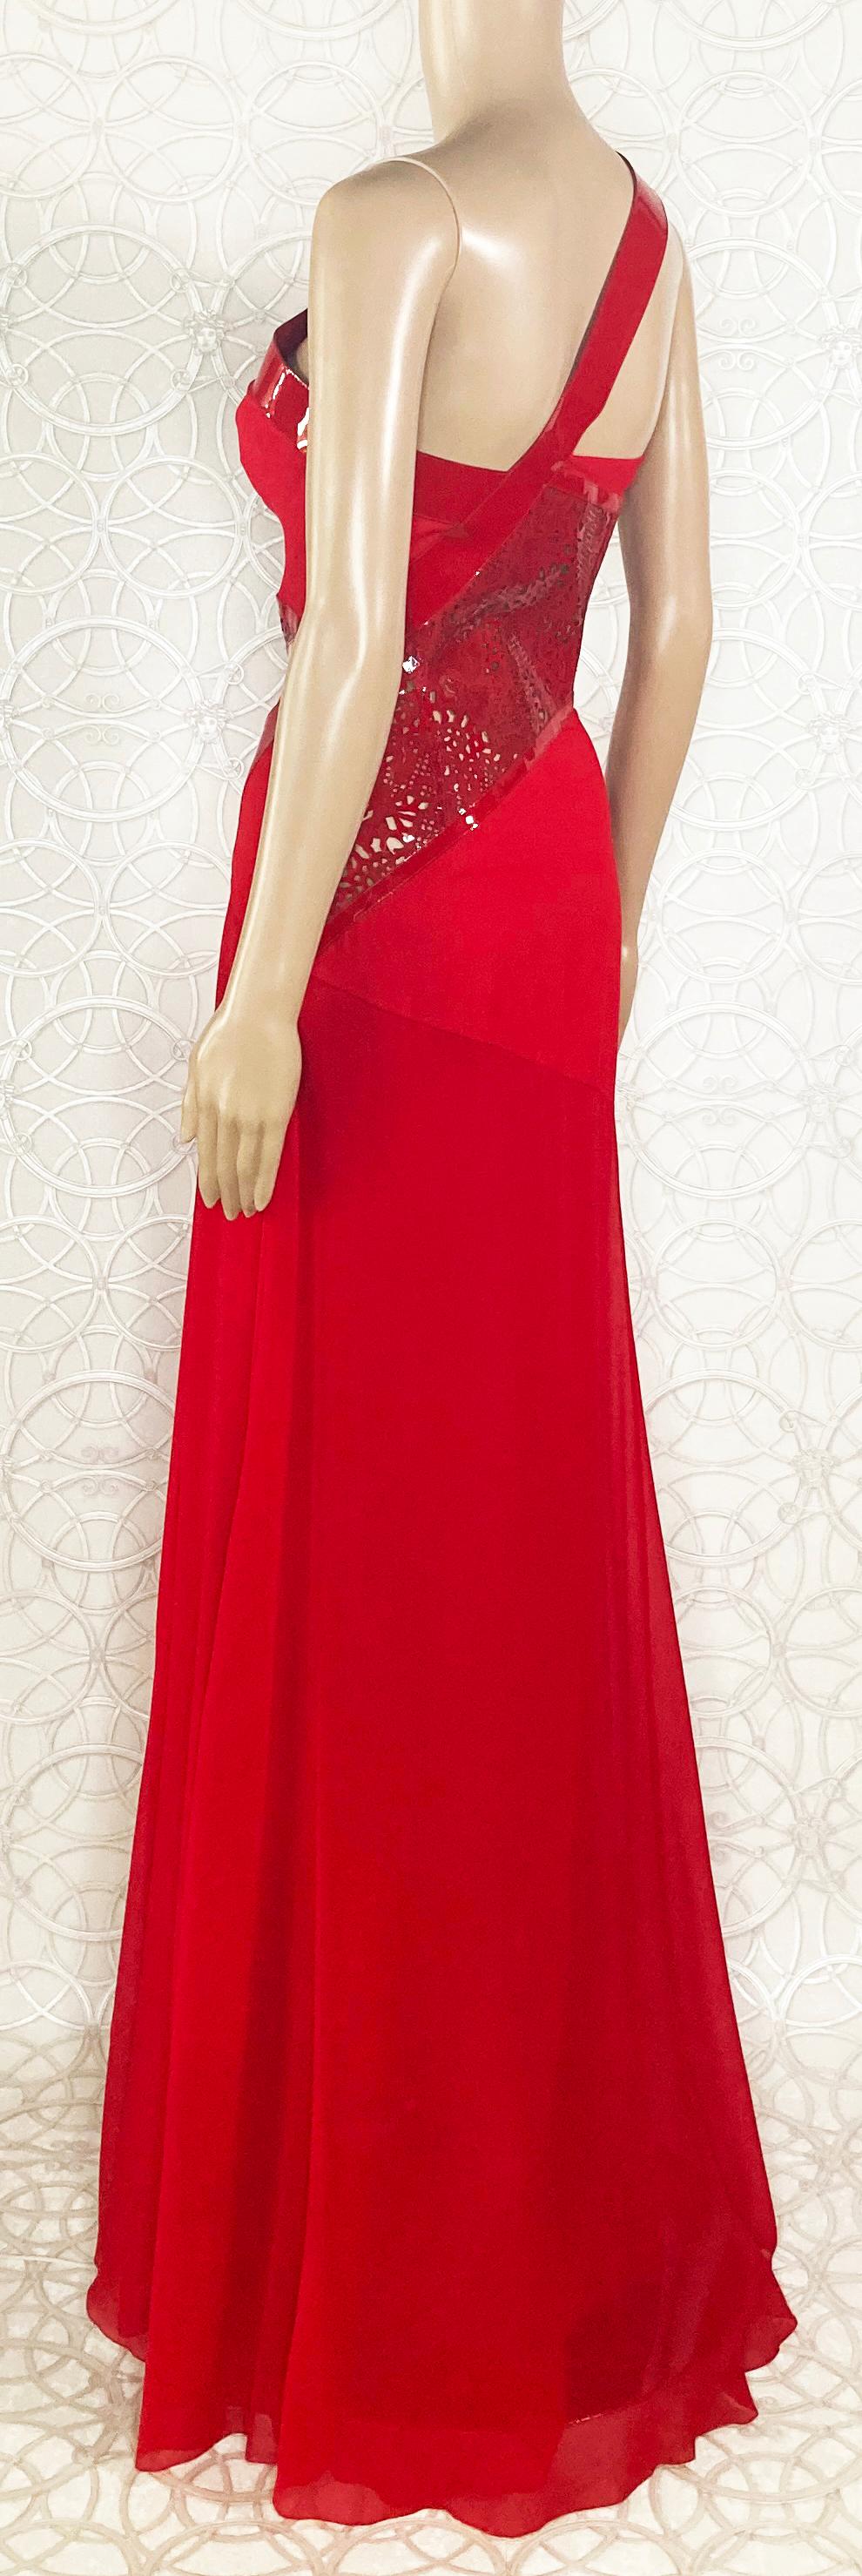 VERSACE RED SILK EVENING LONG GOWN DRESS w/PATENT LEATHER INSERTS 38 -2 For Sale 5